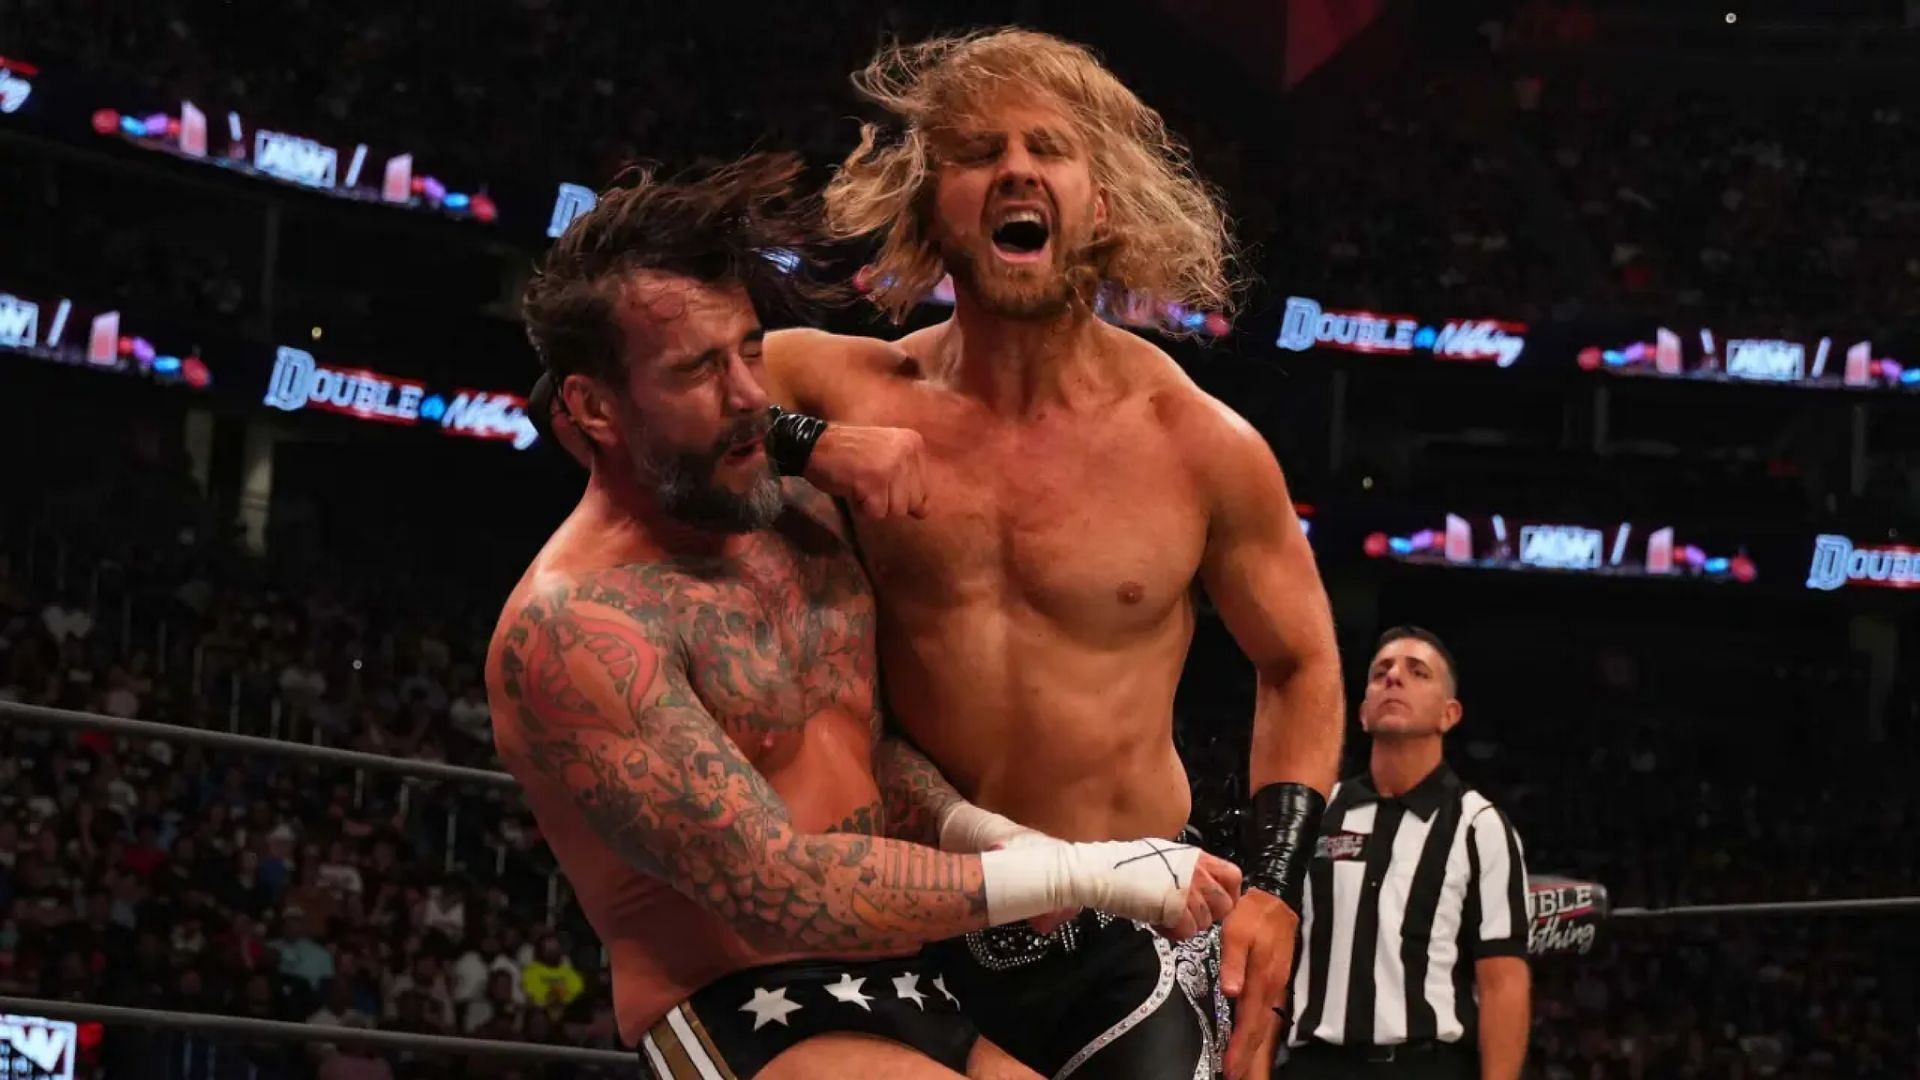 Is there still bad blood between Hangman Page and CM Punk?